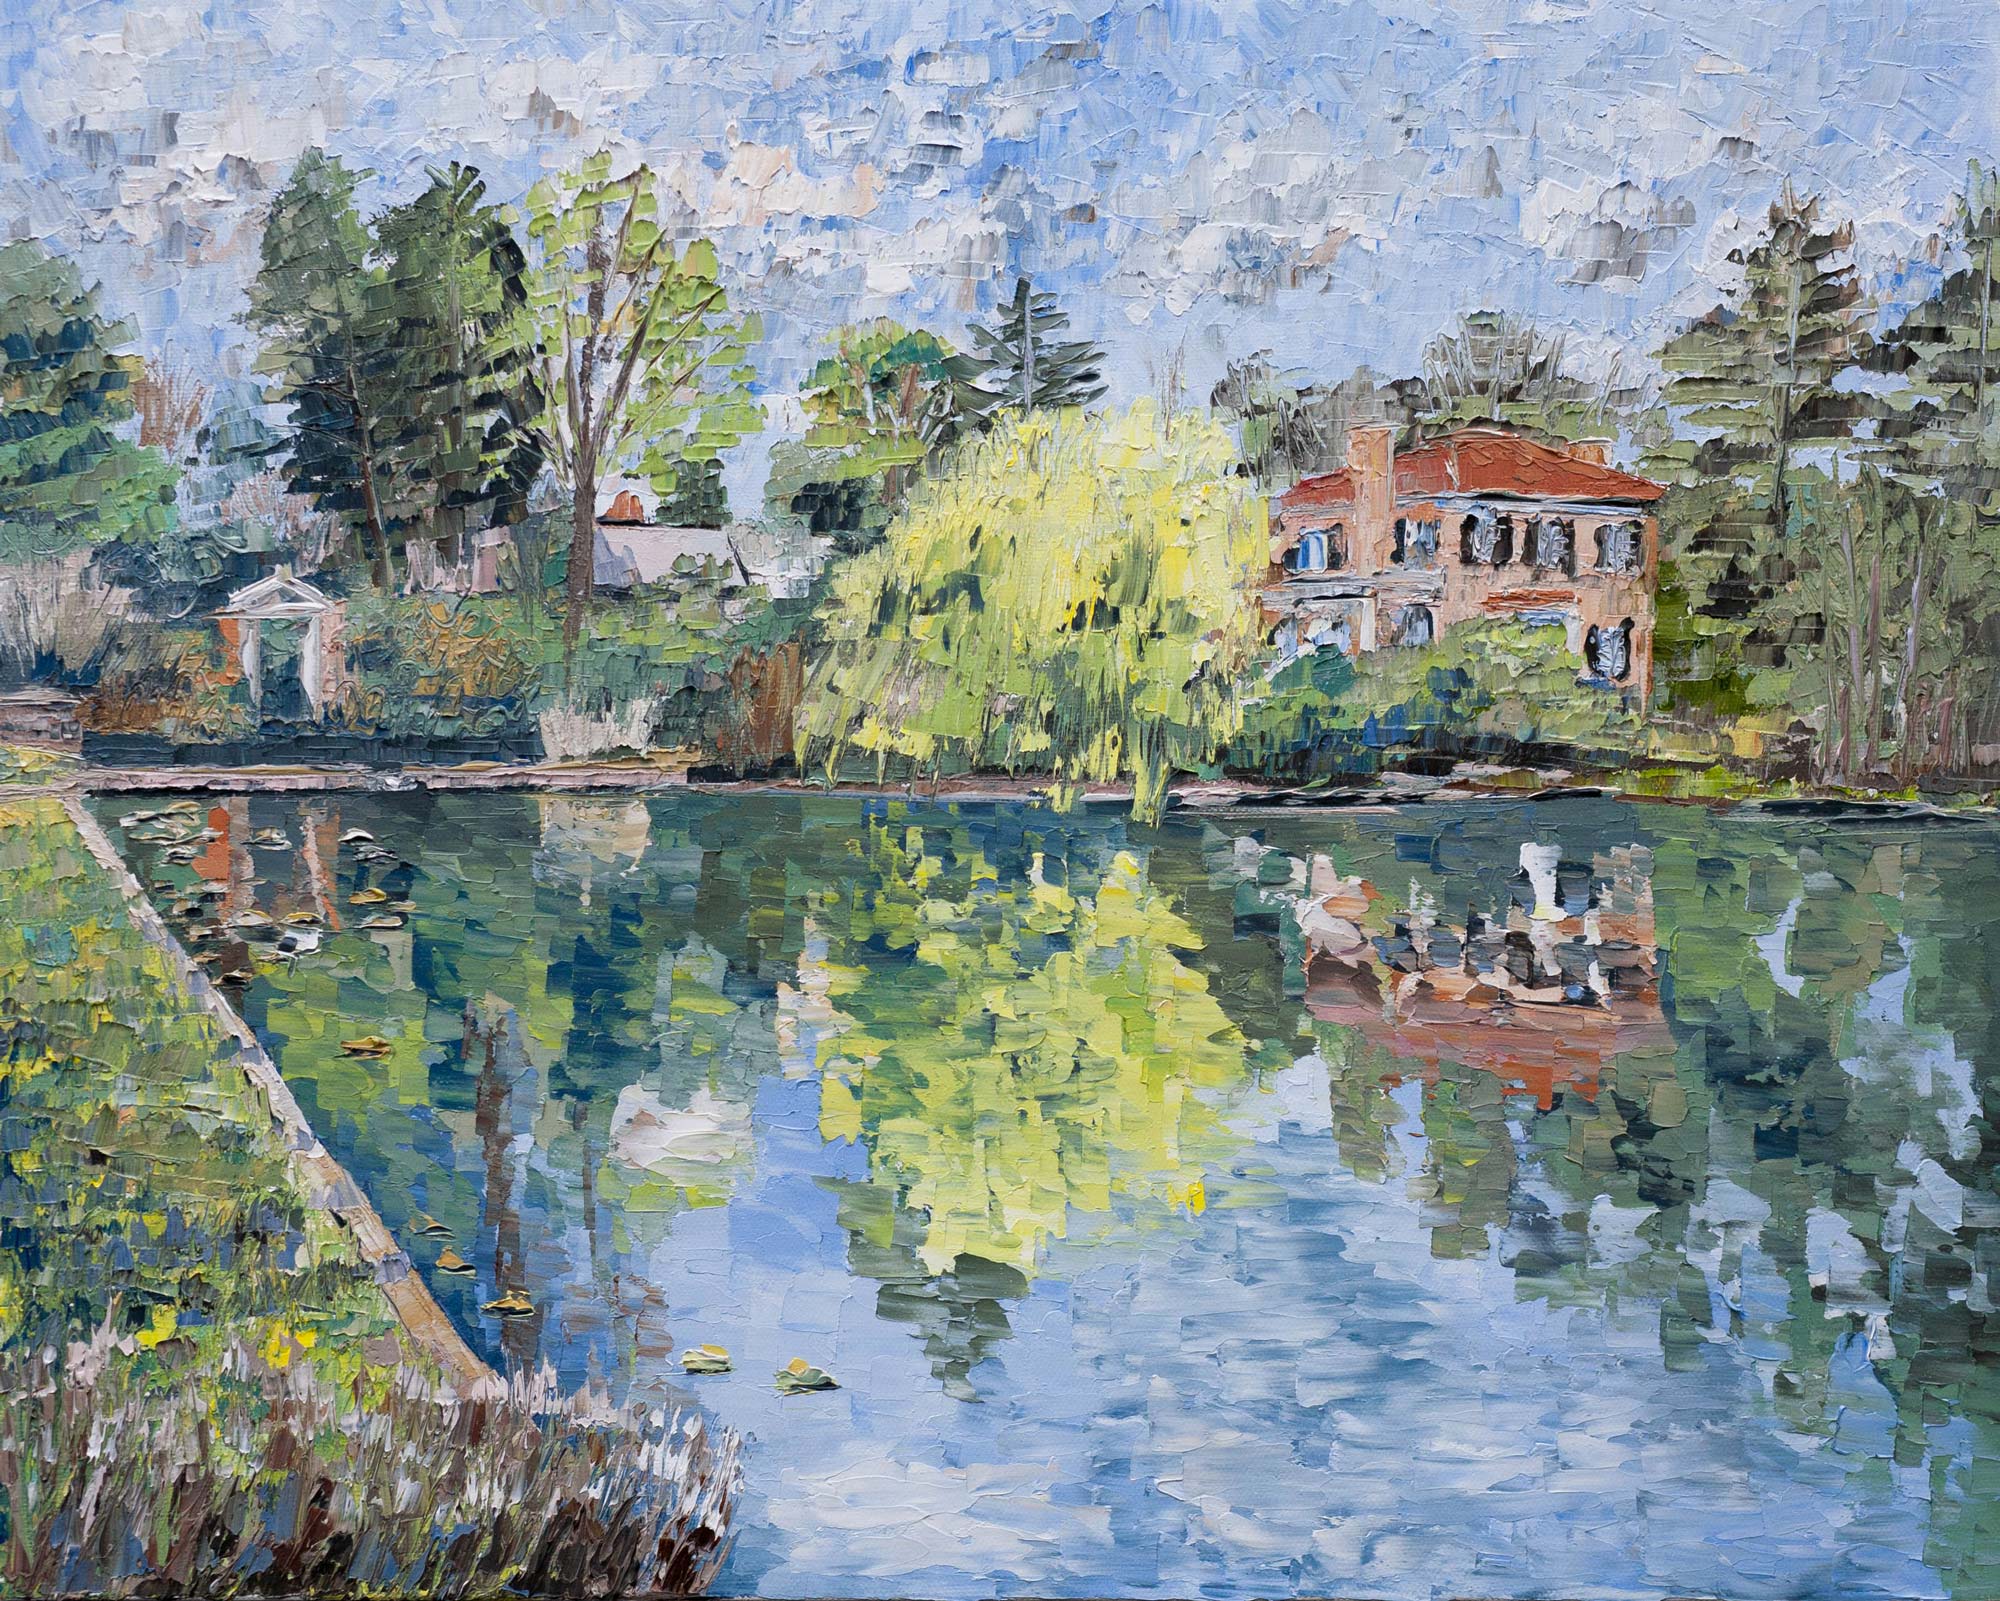 painting of Dell pond and the buildings next to it reflecting on the water